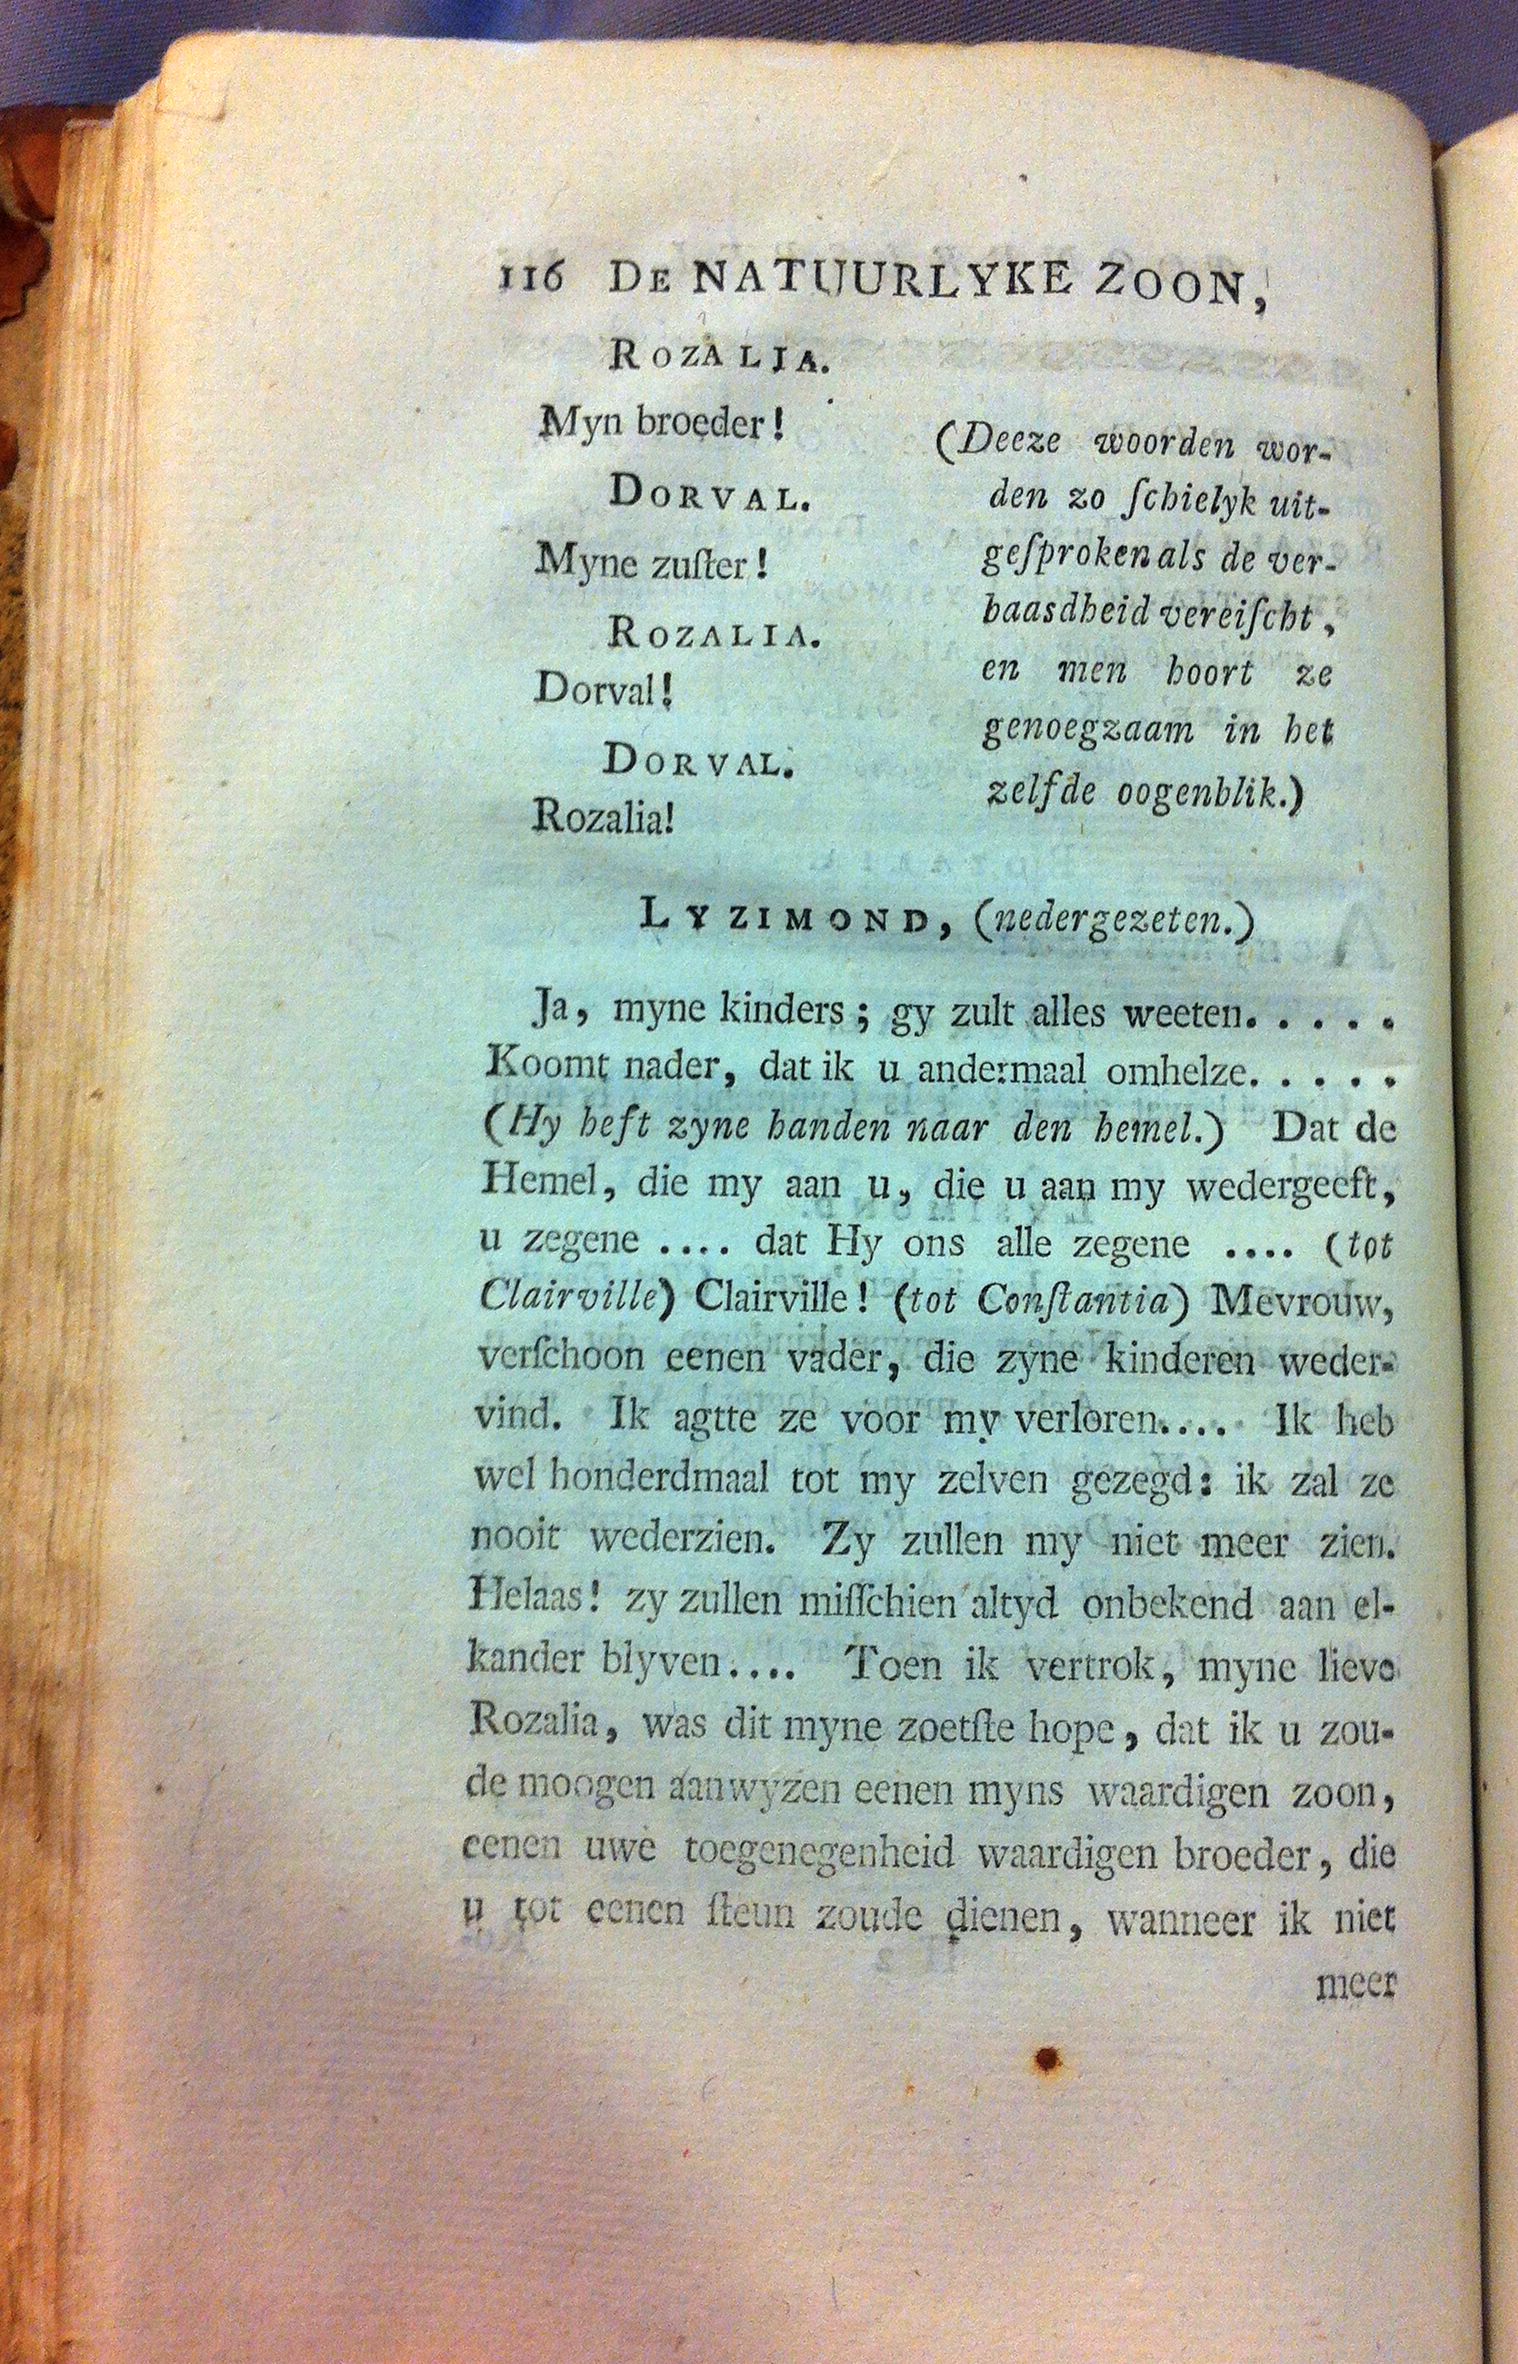 WolffZoon1774p116